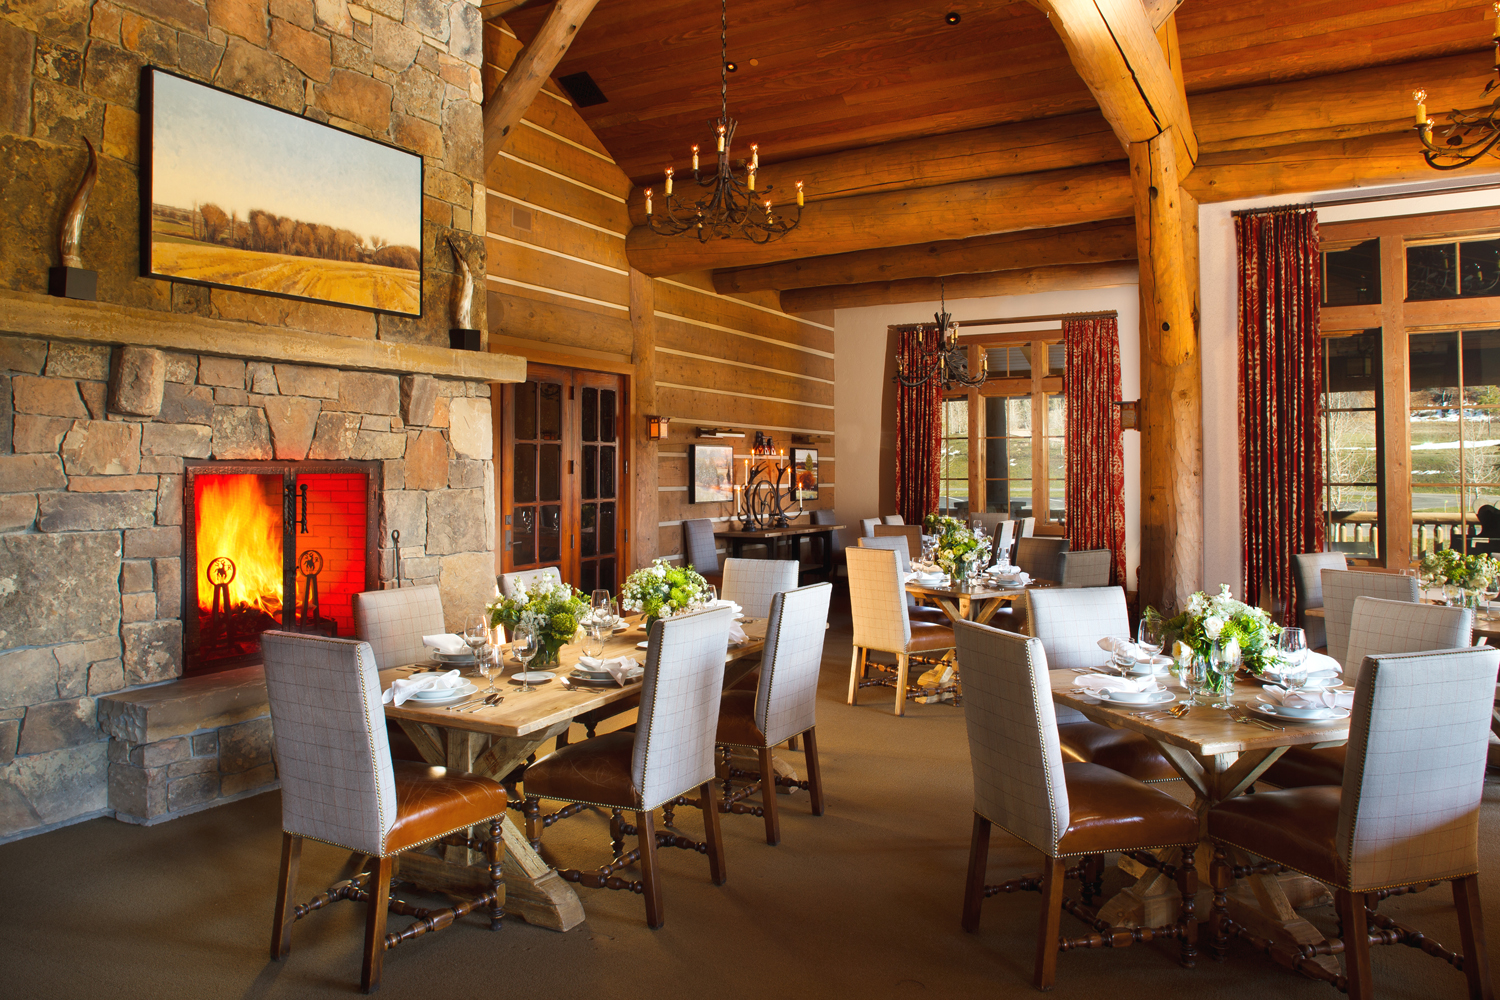 WRJ’s Snake River Sporting Club dining room combines standout work from regional artists with sophisticated furnishings in inviting textures to complement rustic logs and stone (photo by David Swift).